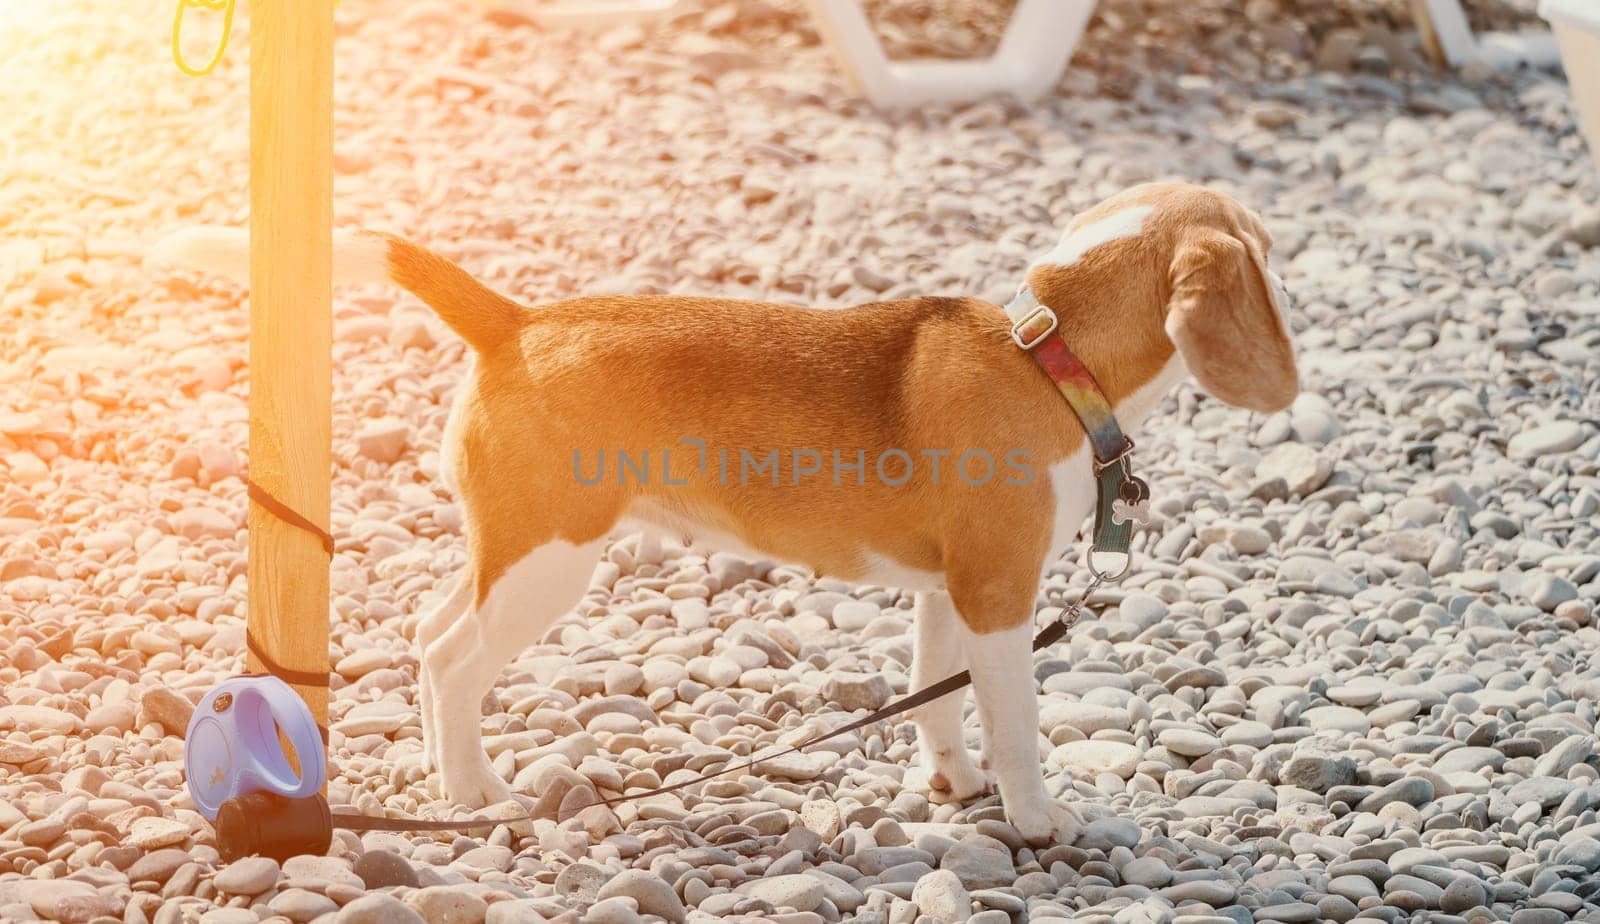 Ginger dog with white spots is resting on a pebble beach near the sea on a sunny day, waiting for owner by panophotograph